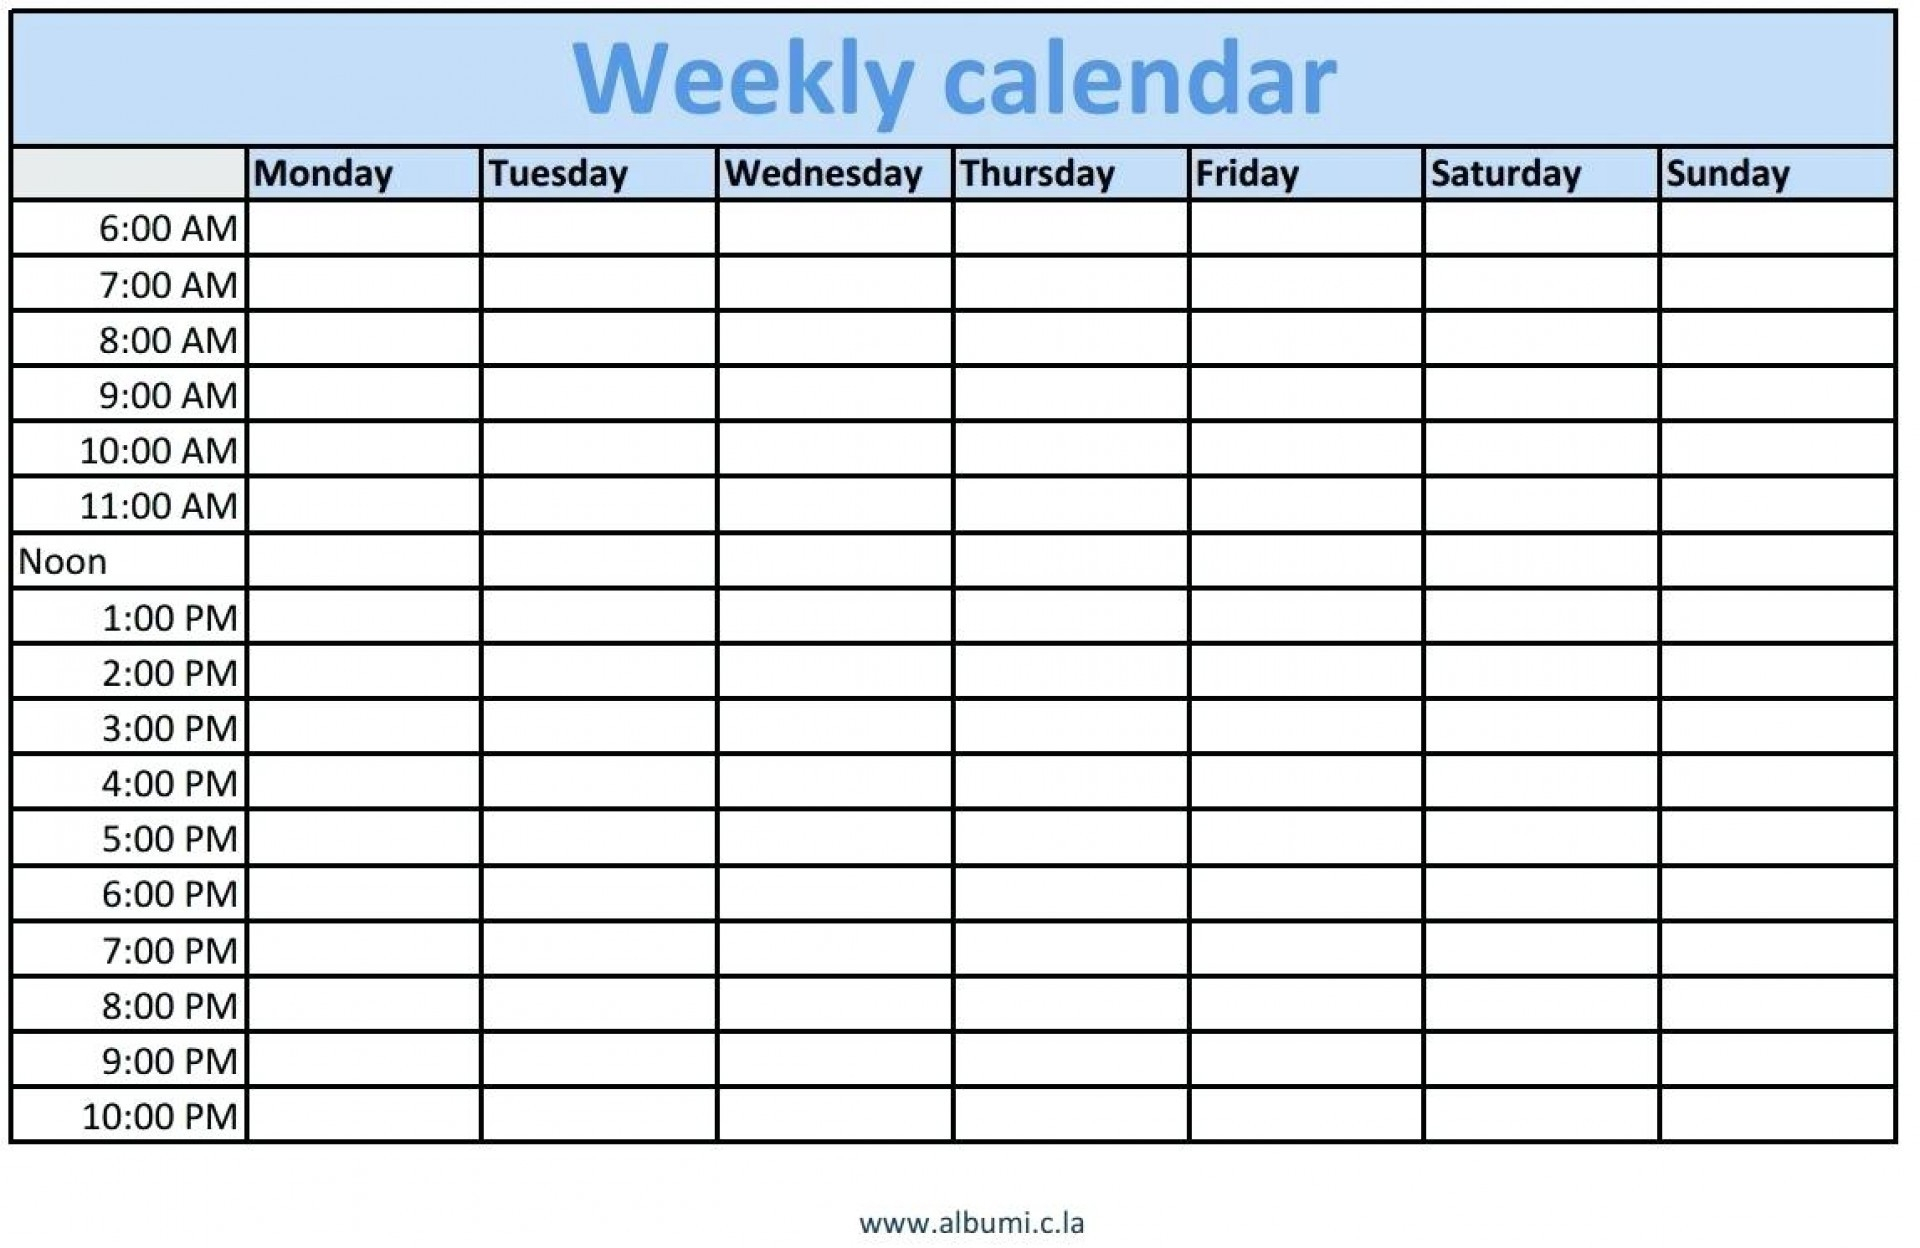 Blank Schedule Template With Time Slots | Example Calendar for Blank Daily Calendar With Time Slots